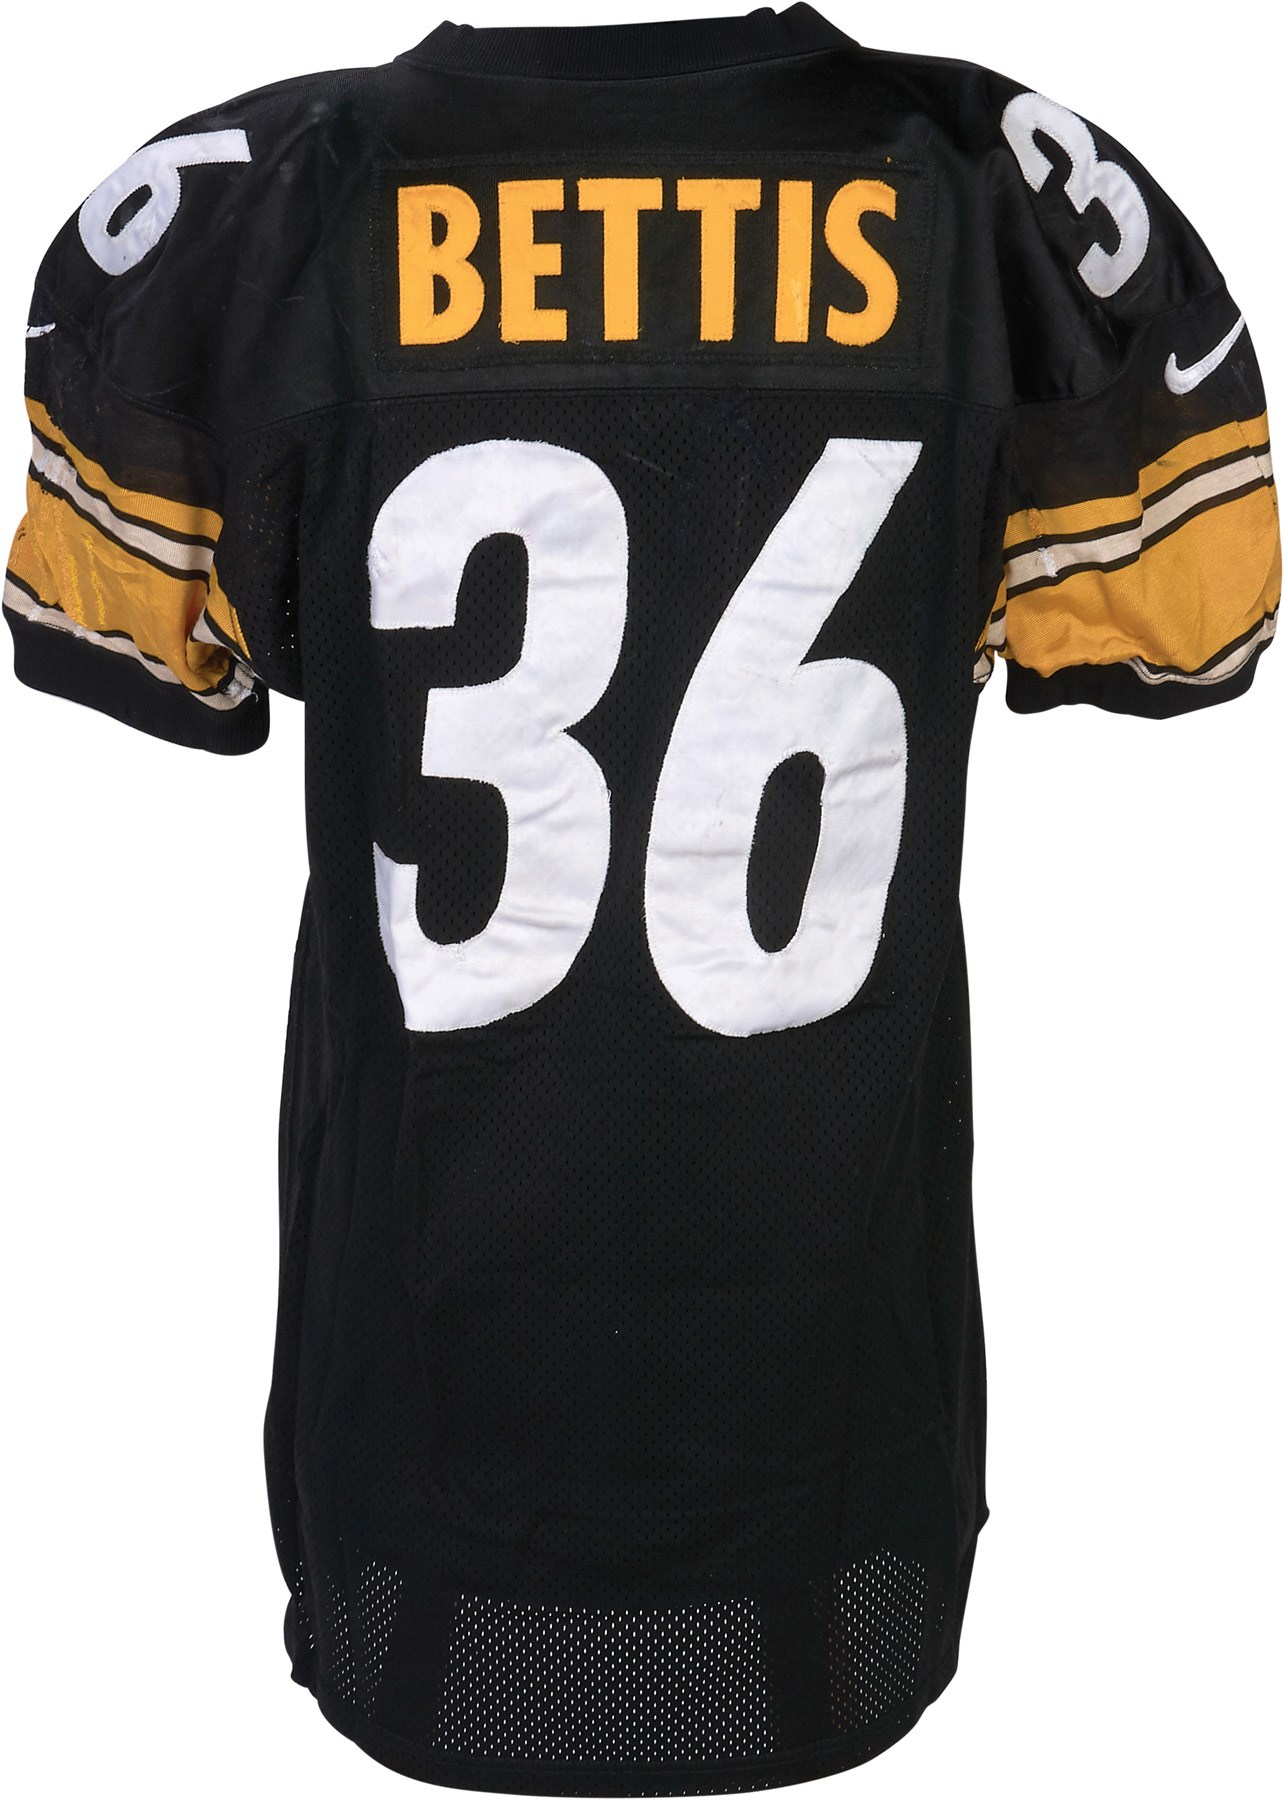 The Pittsburgh Steelers Game Worn Jersey Archive - 1997 Season Jerome Bettis Pittsburgh Steelers Game Worn Jersey - 646yds & 3TD's (Photo-Matched to 6 Games)